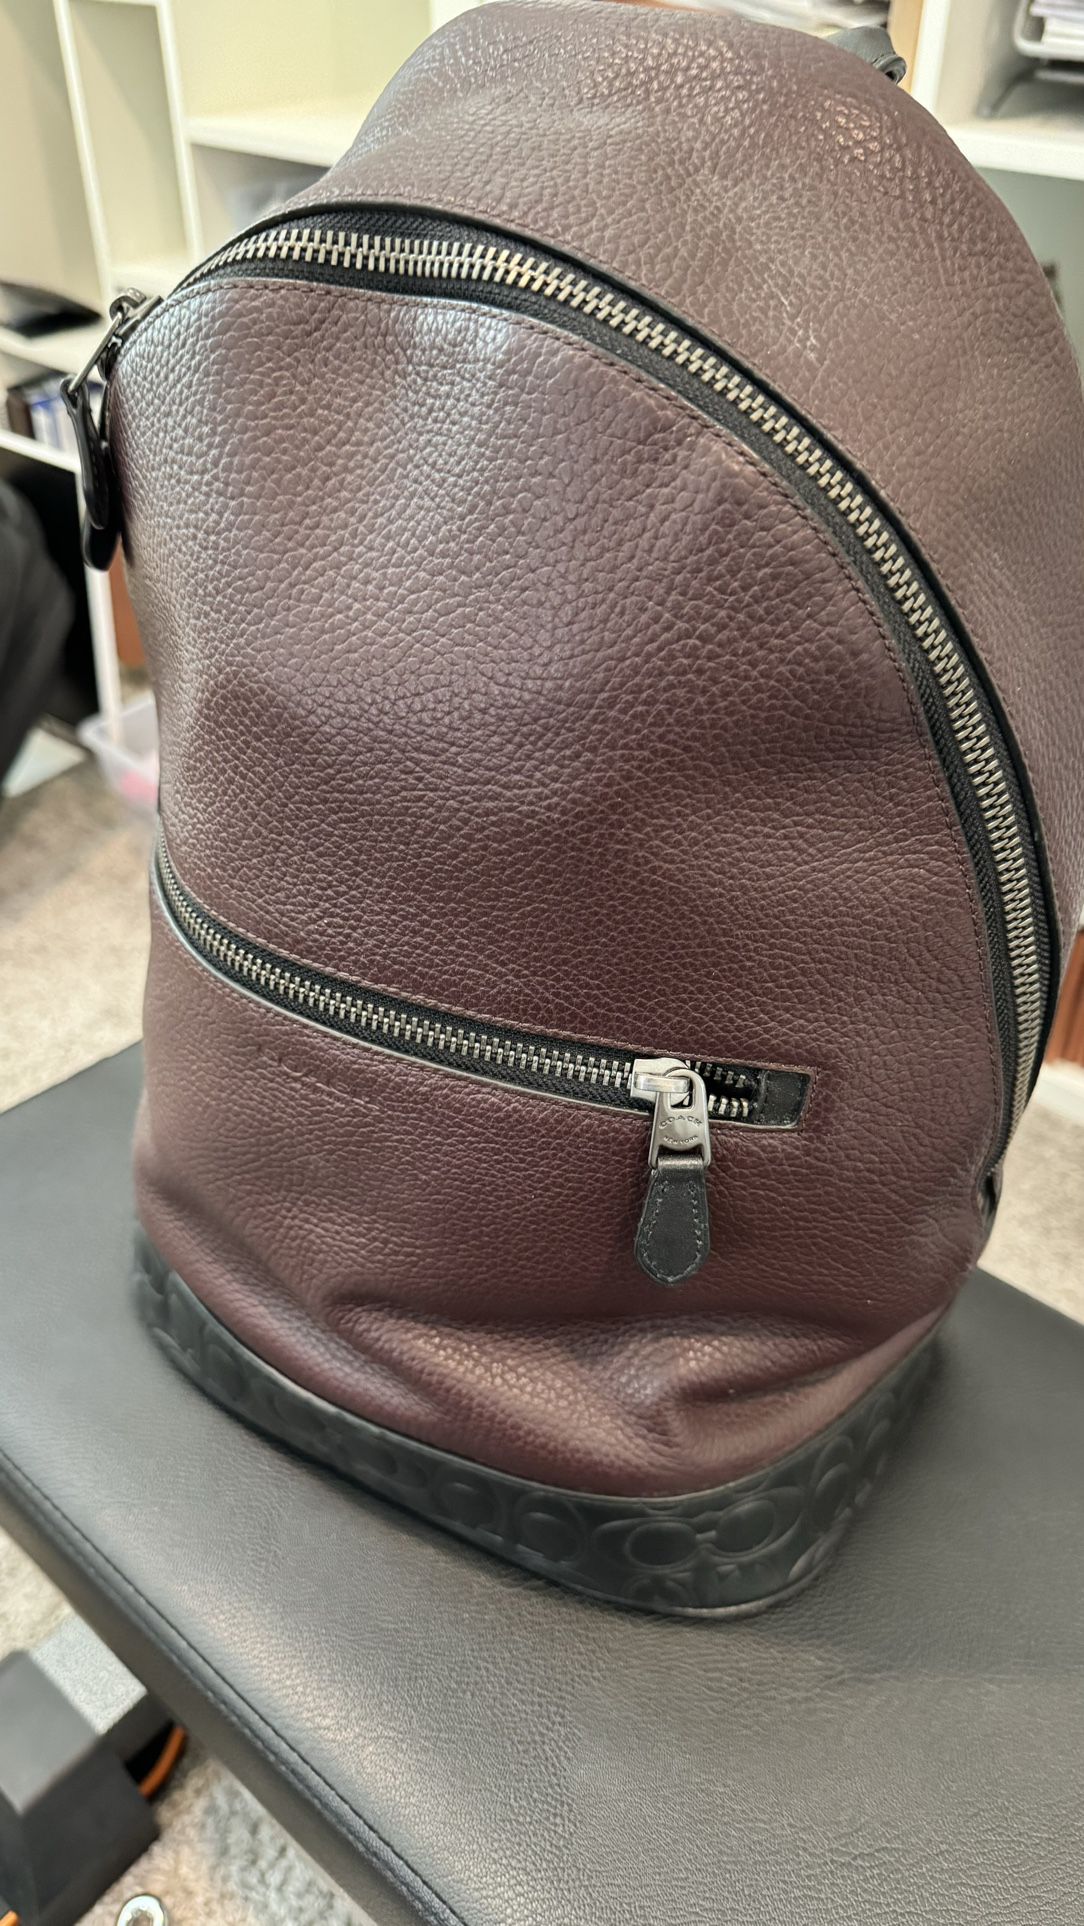 OEM Authentic Coach Leather Backpack Brown